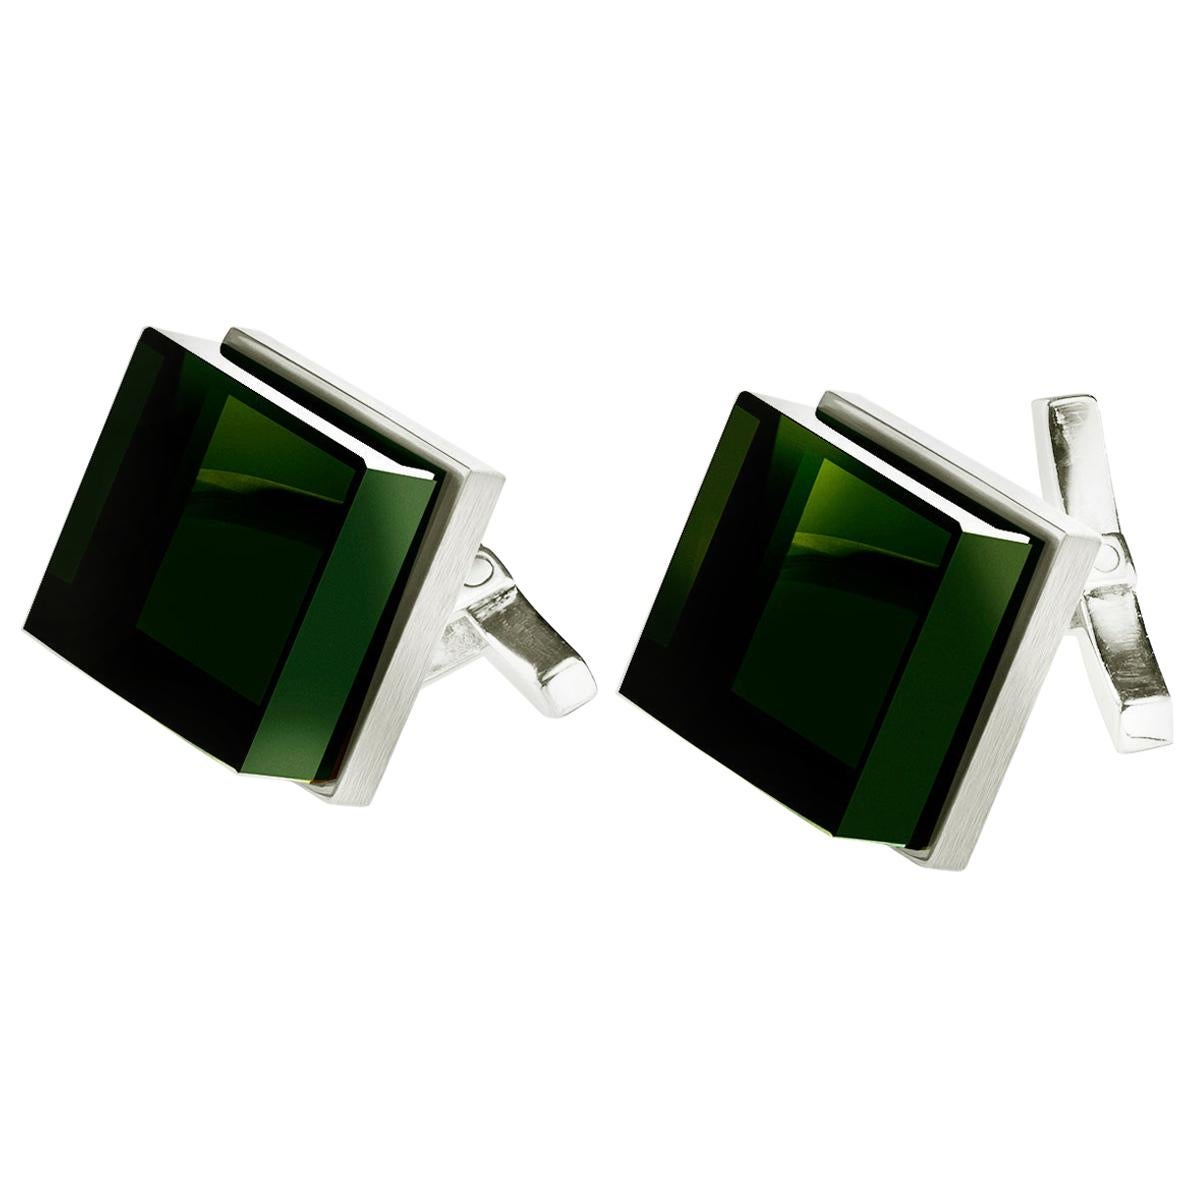 Sterling Silver Men's Art Deco Style Cufflinks by the Artist with Green Quartzes